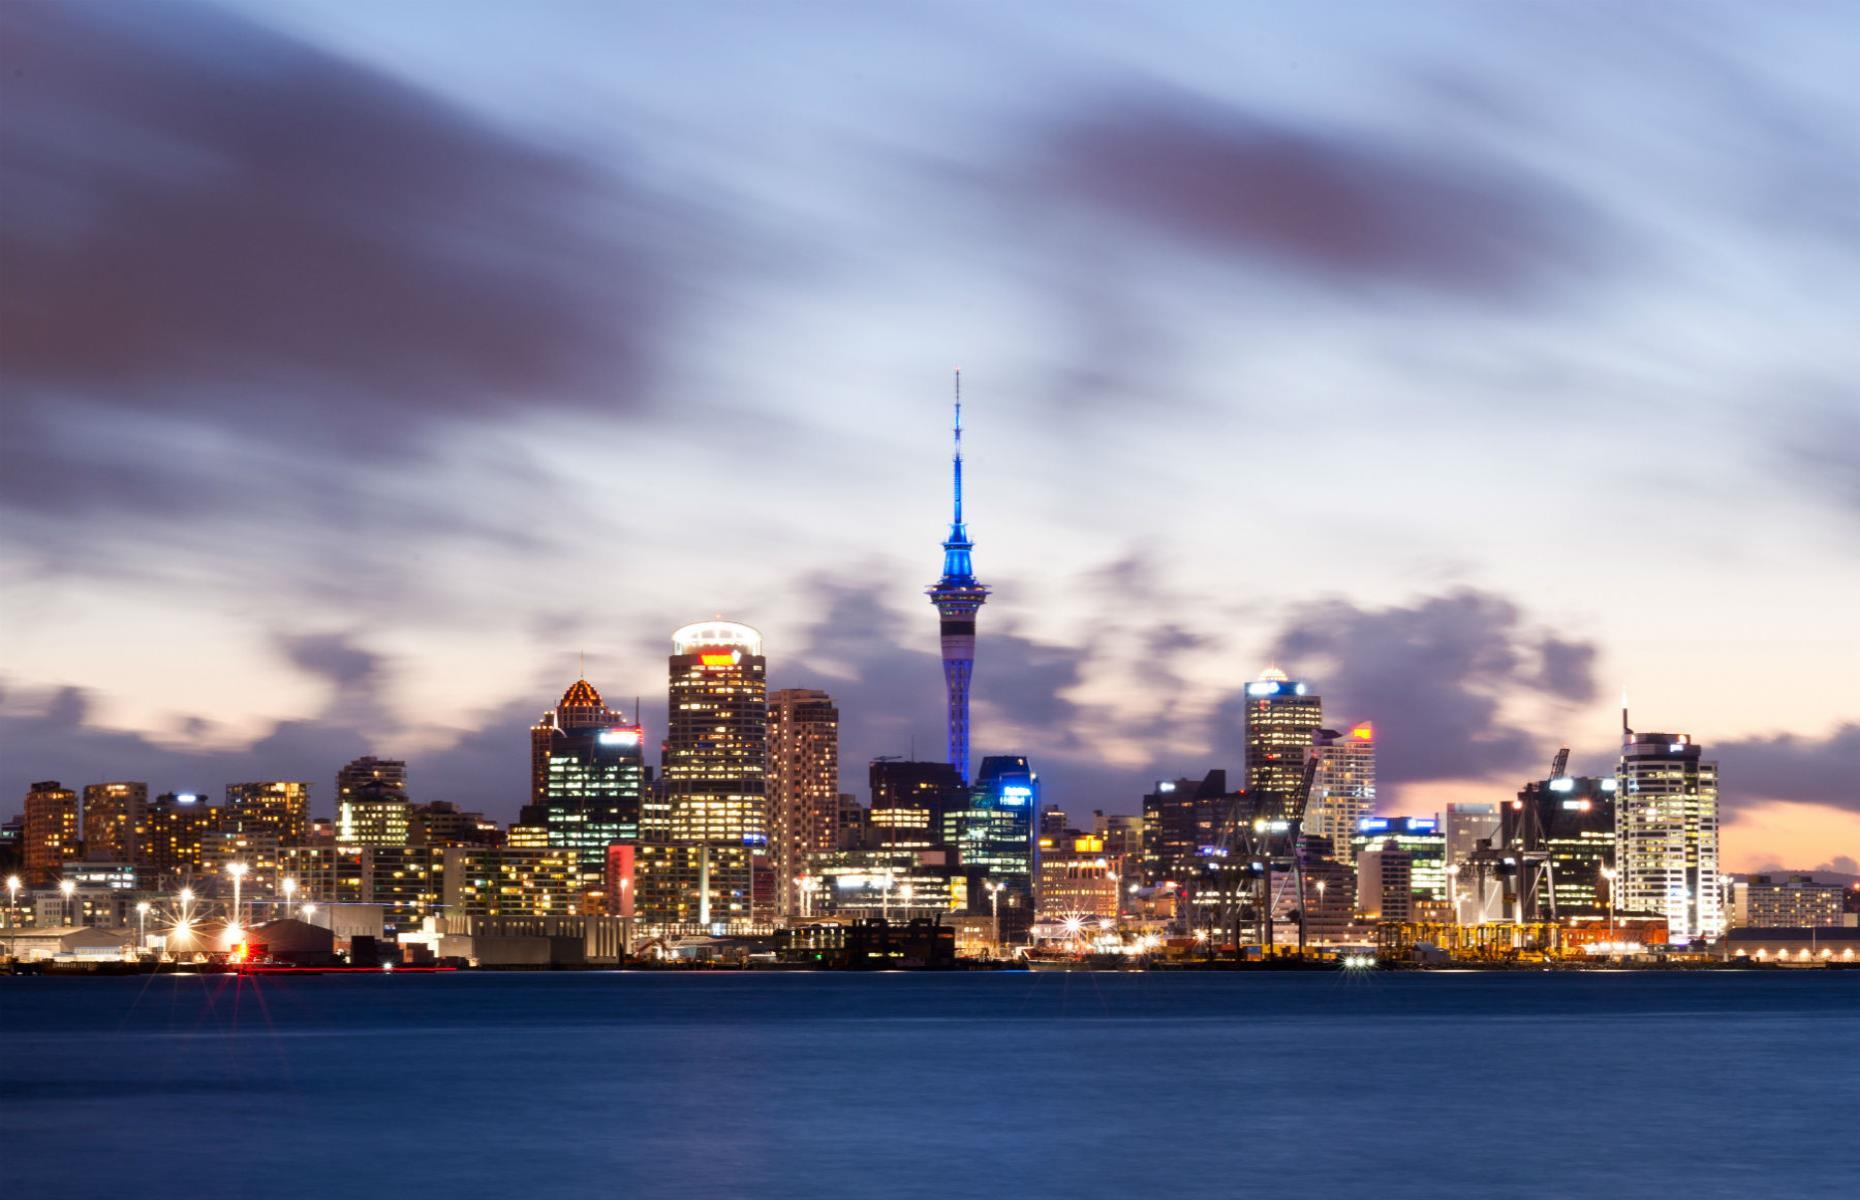 16th most expensive country: New Zealand (68.2)